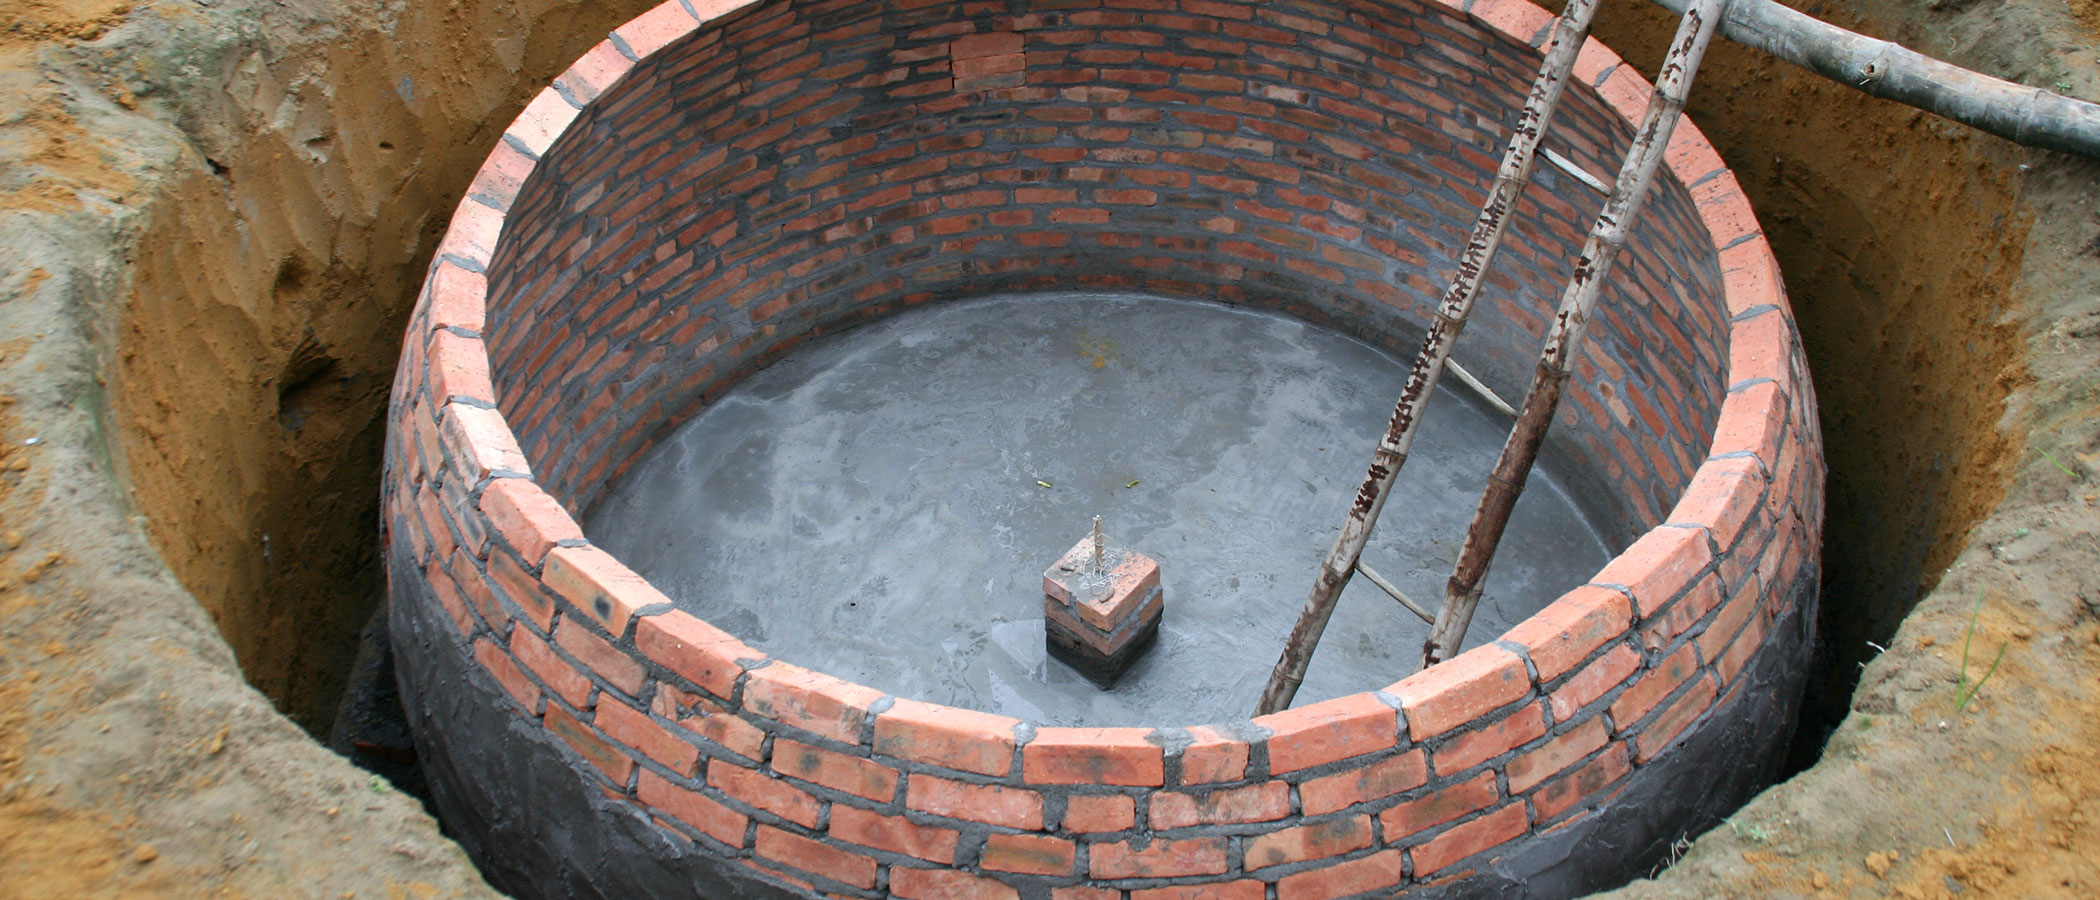 Small-scale biogas plant made of brick and cement then buried below ground.